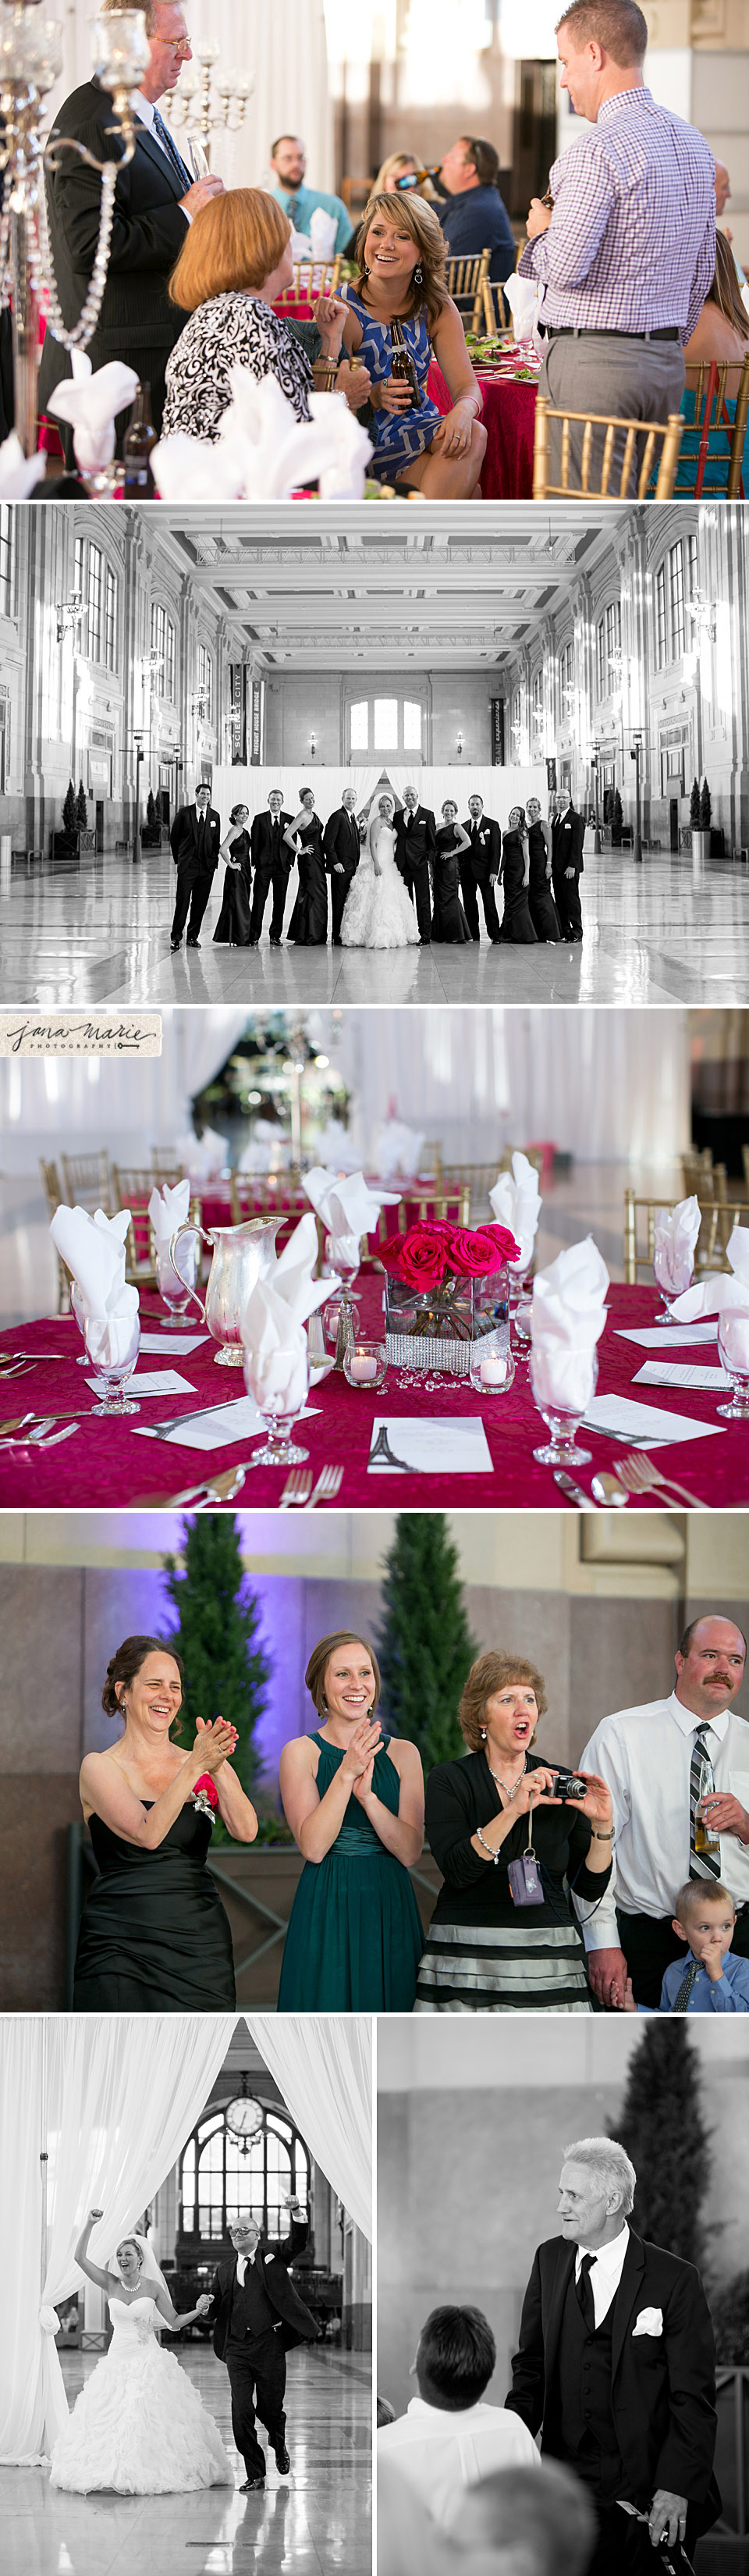 Candy table, Reception decor, Union Station parties and events, KC weddings, Jana Marie Photography